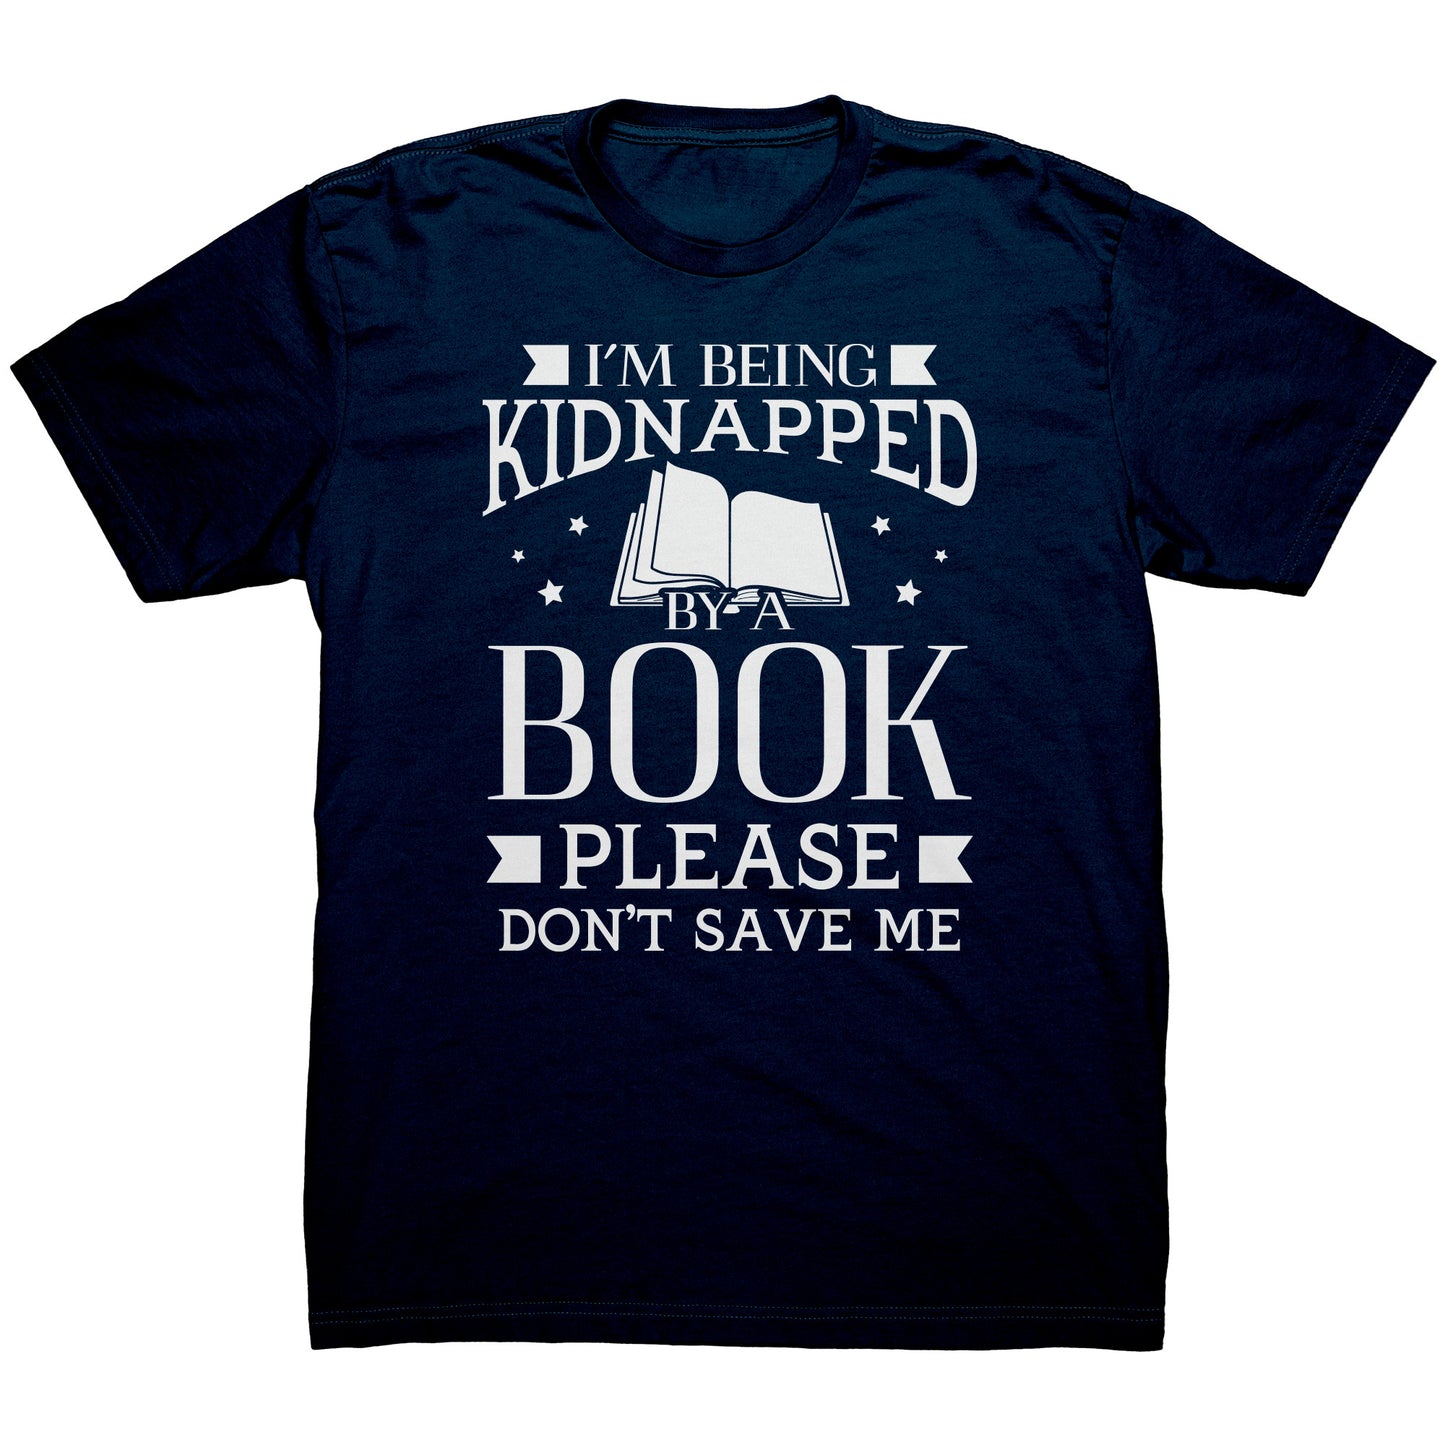 I'm Being Kidnapped By A Book Please Don't Save Me | Men's T-Shirt